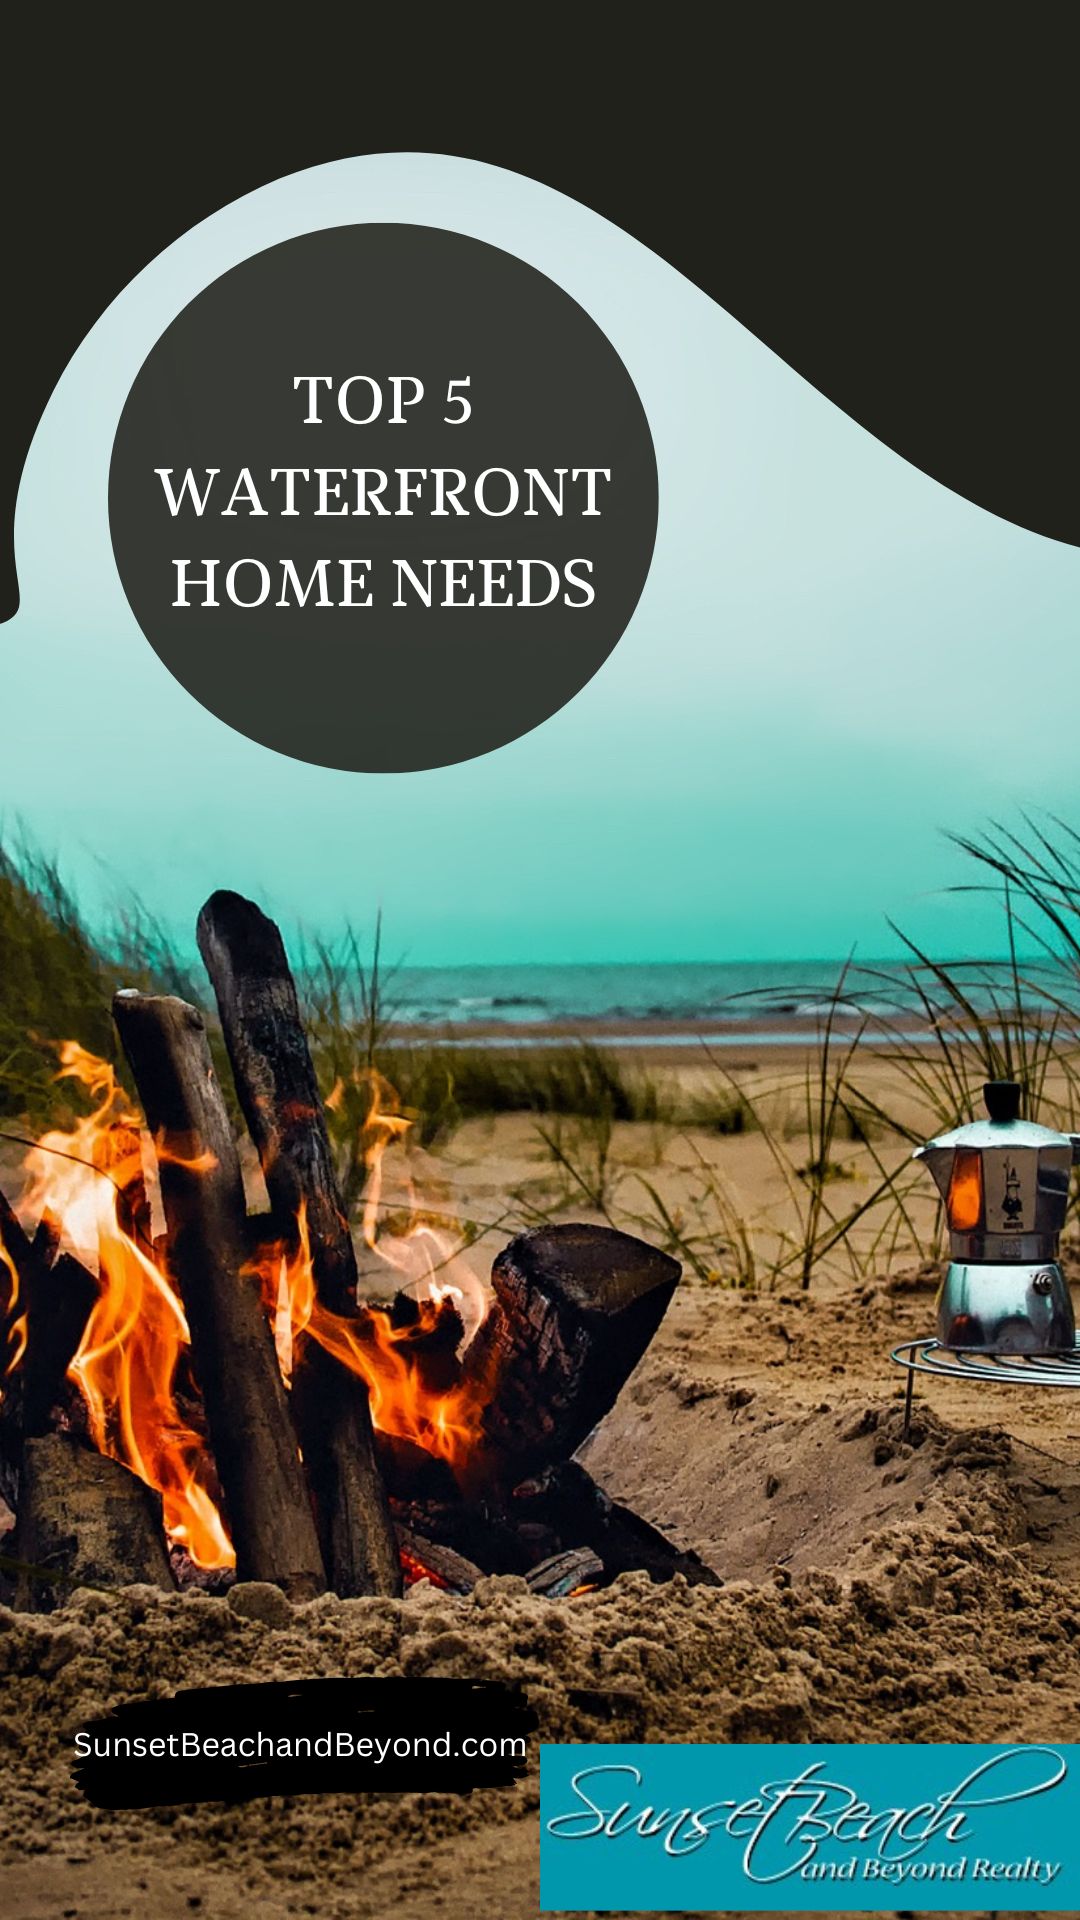 Top 5 Waterfront Home Needs